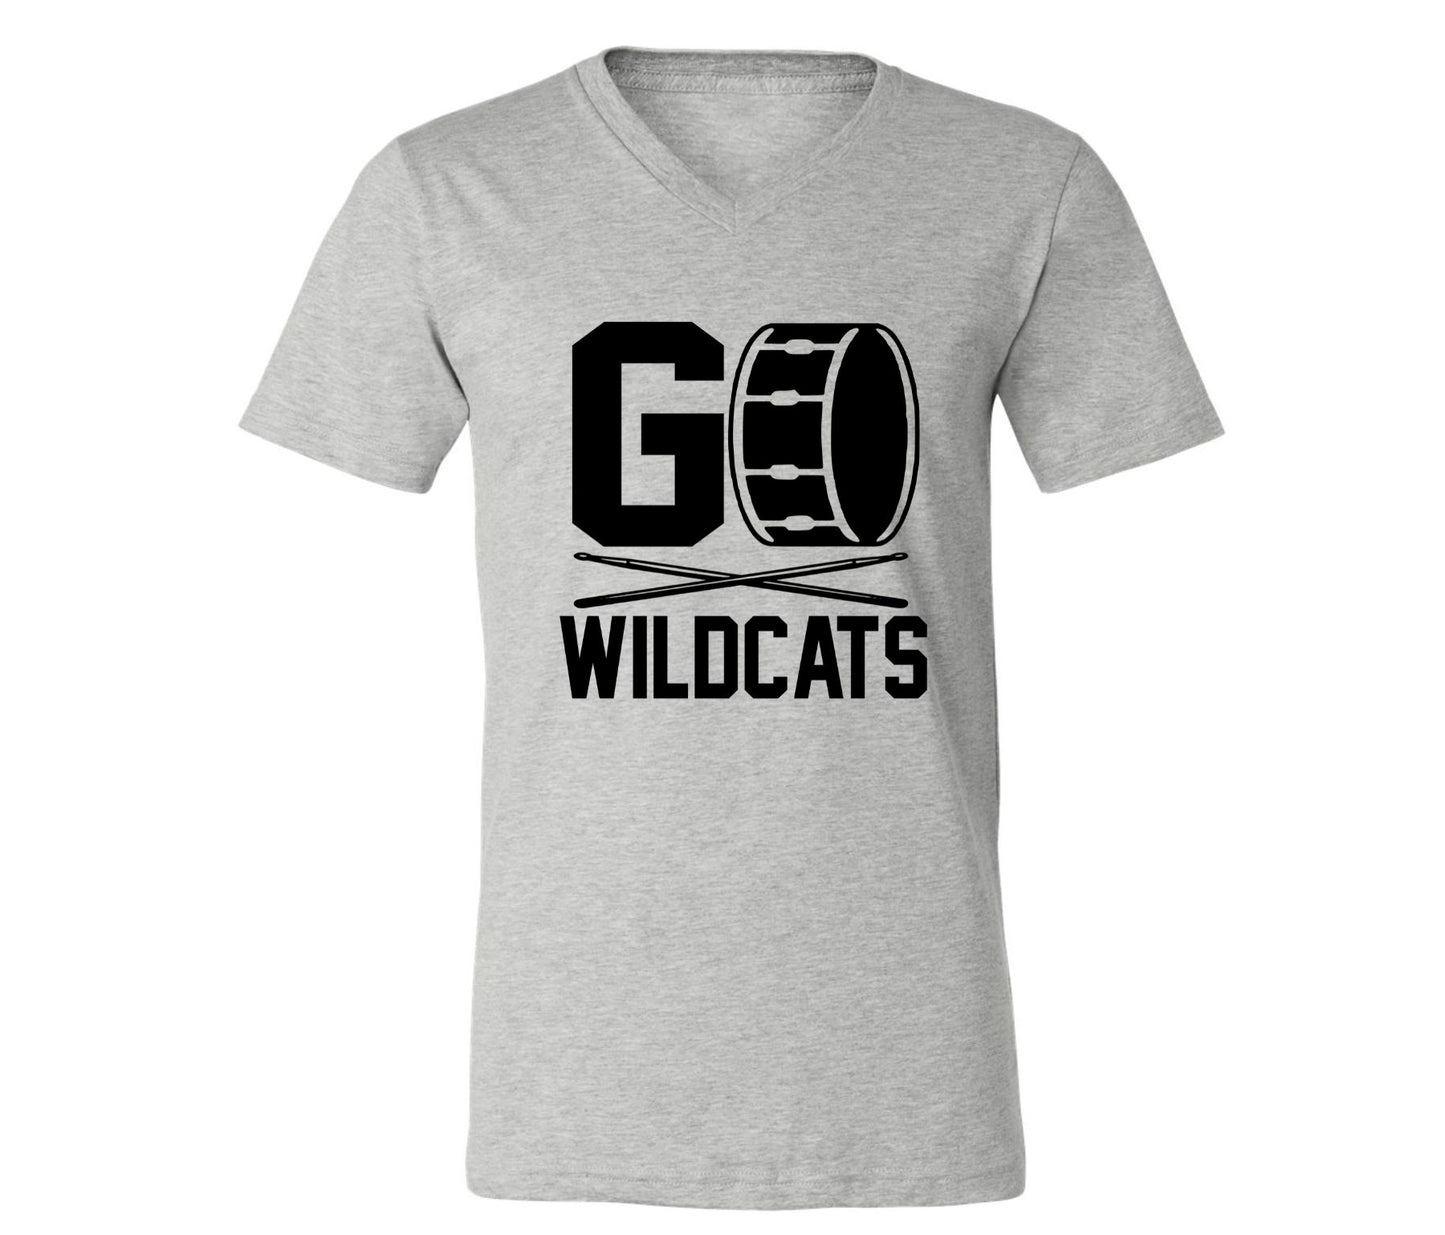 Wildcats band - Crew and V-Neck Tee